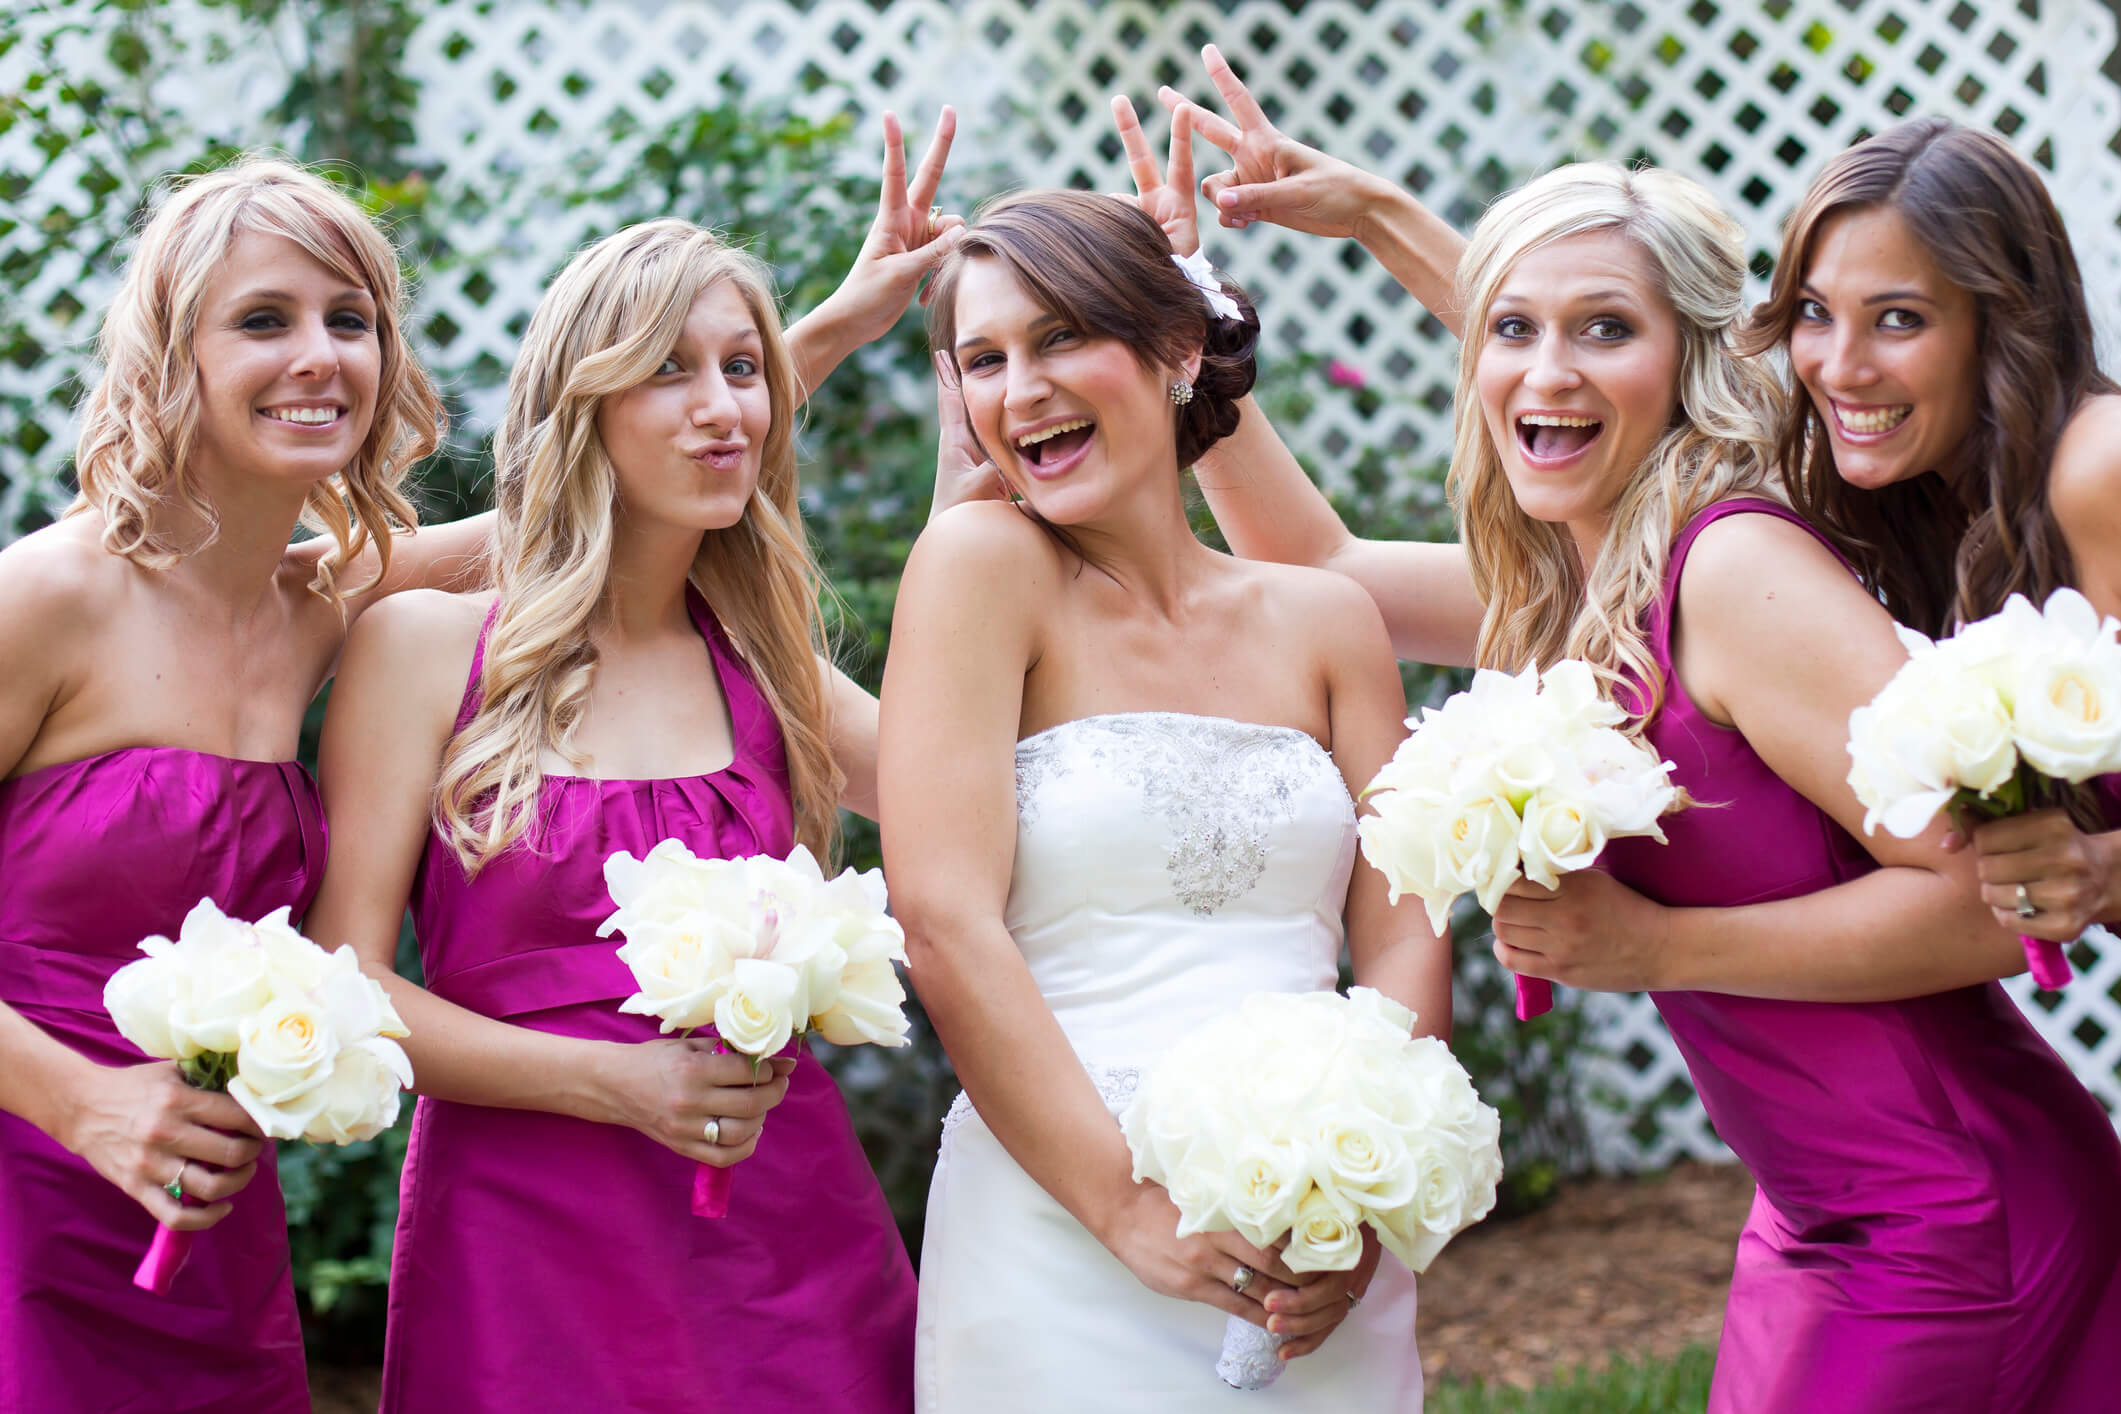 Bride surrounded by bridesmaids in pink dresses